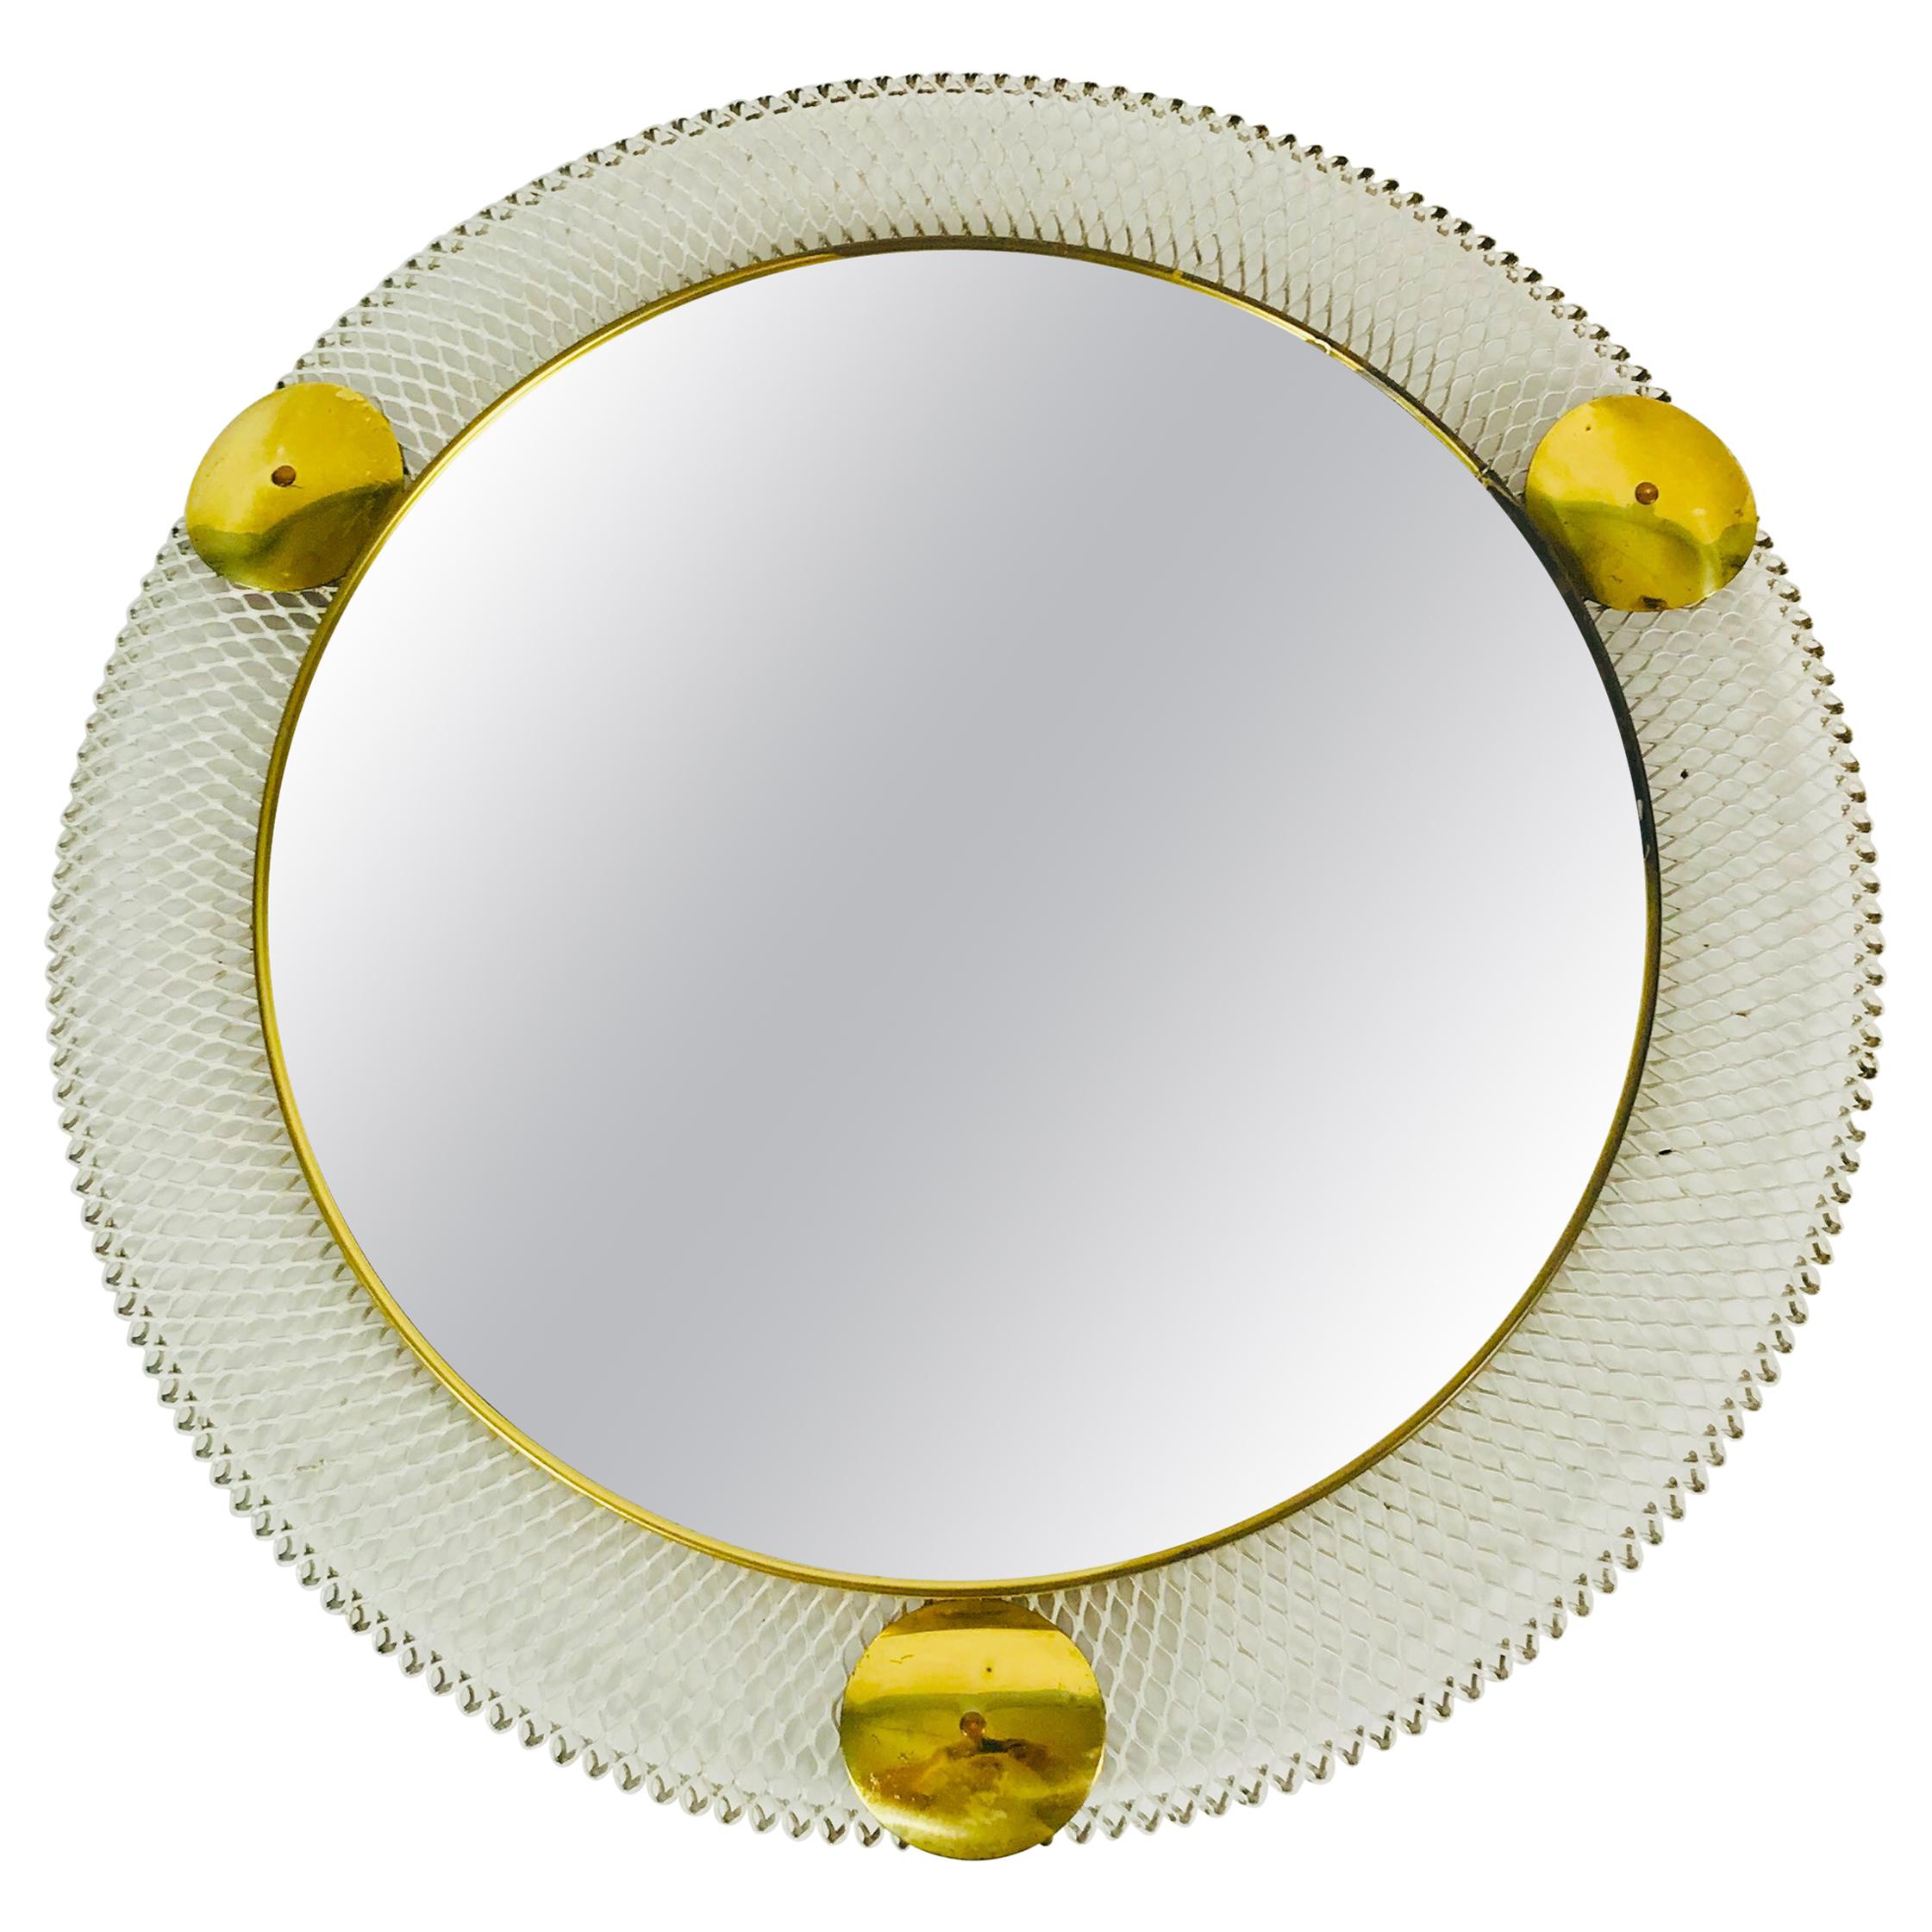 Midcentury Italian Round Metal and Brass Mirror, Italy, 1960s For Sale